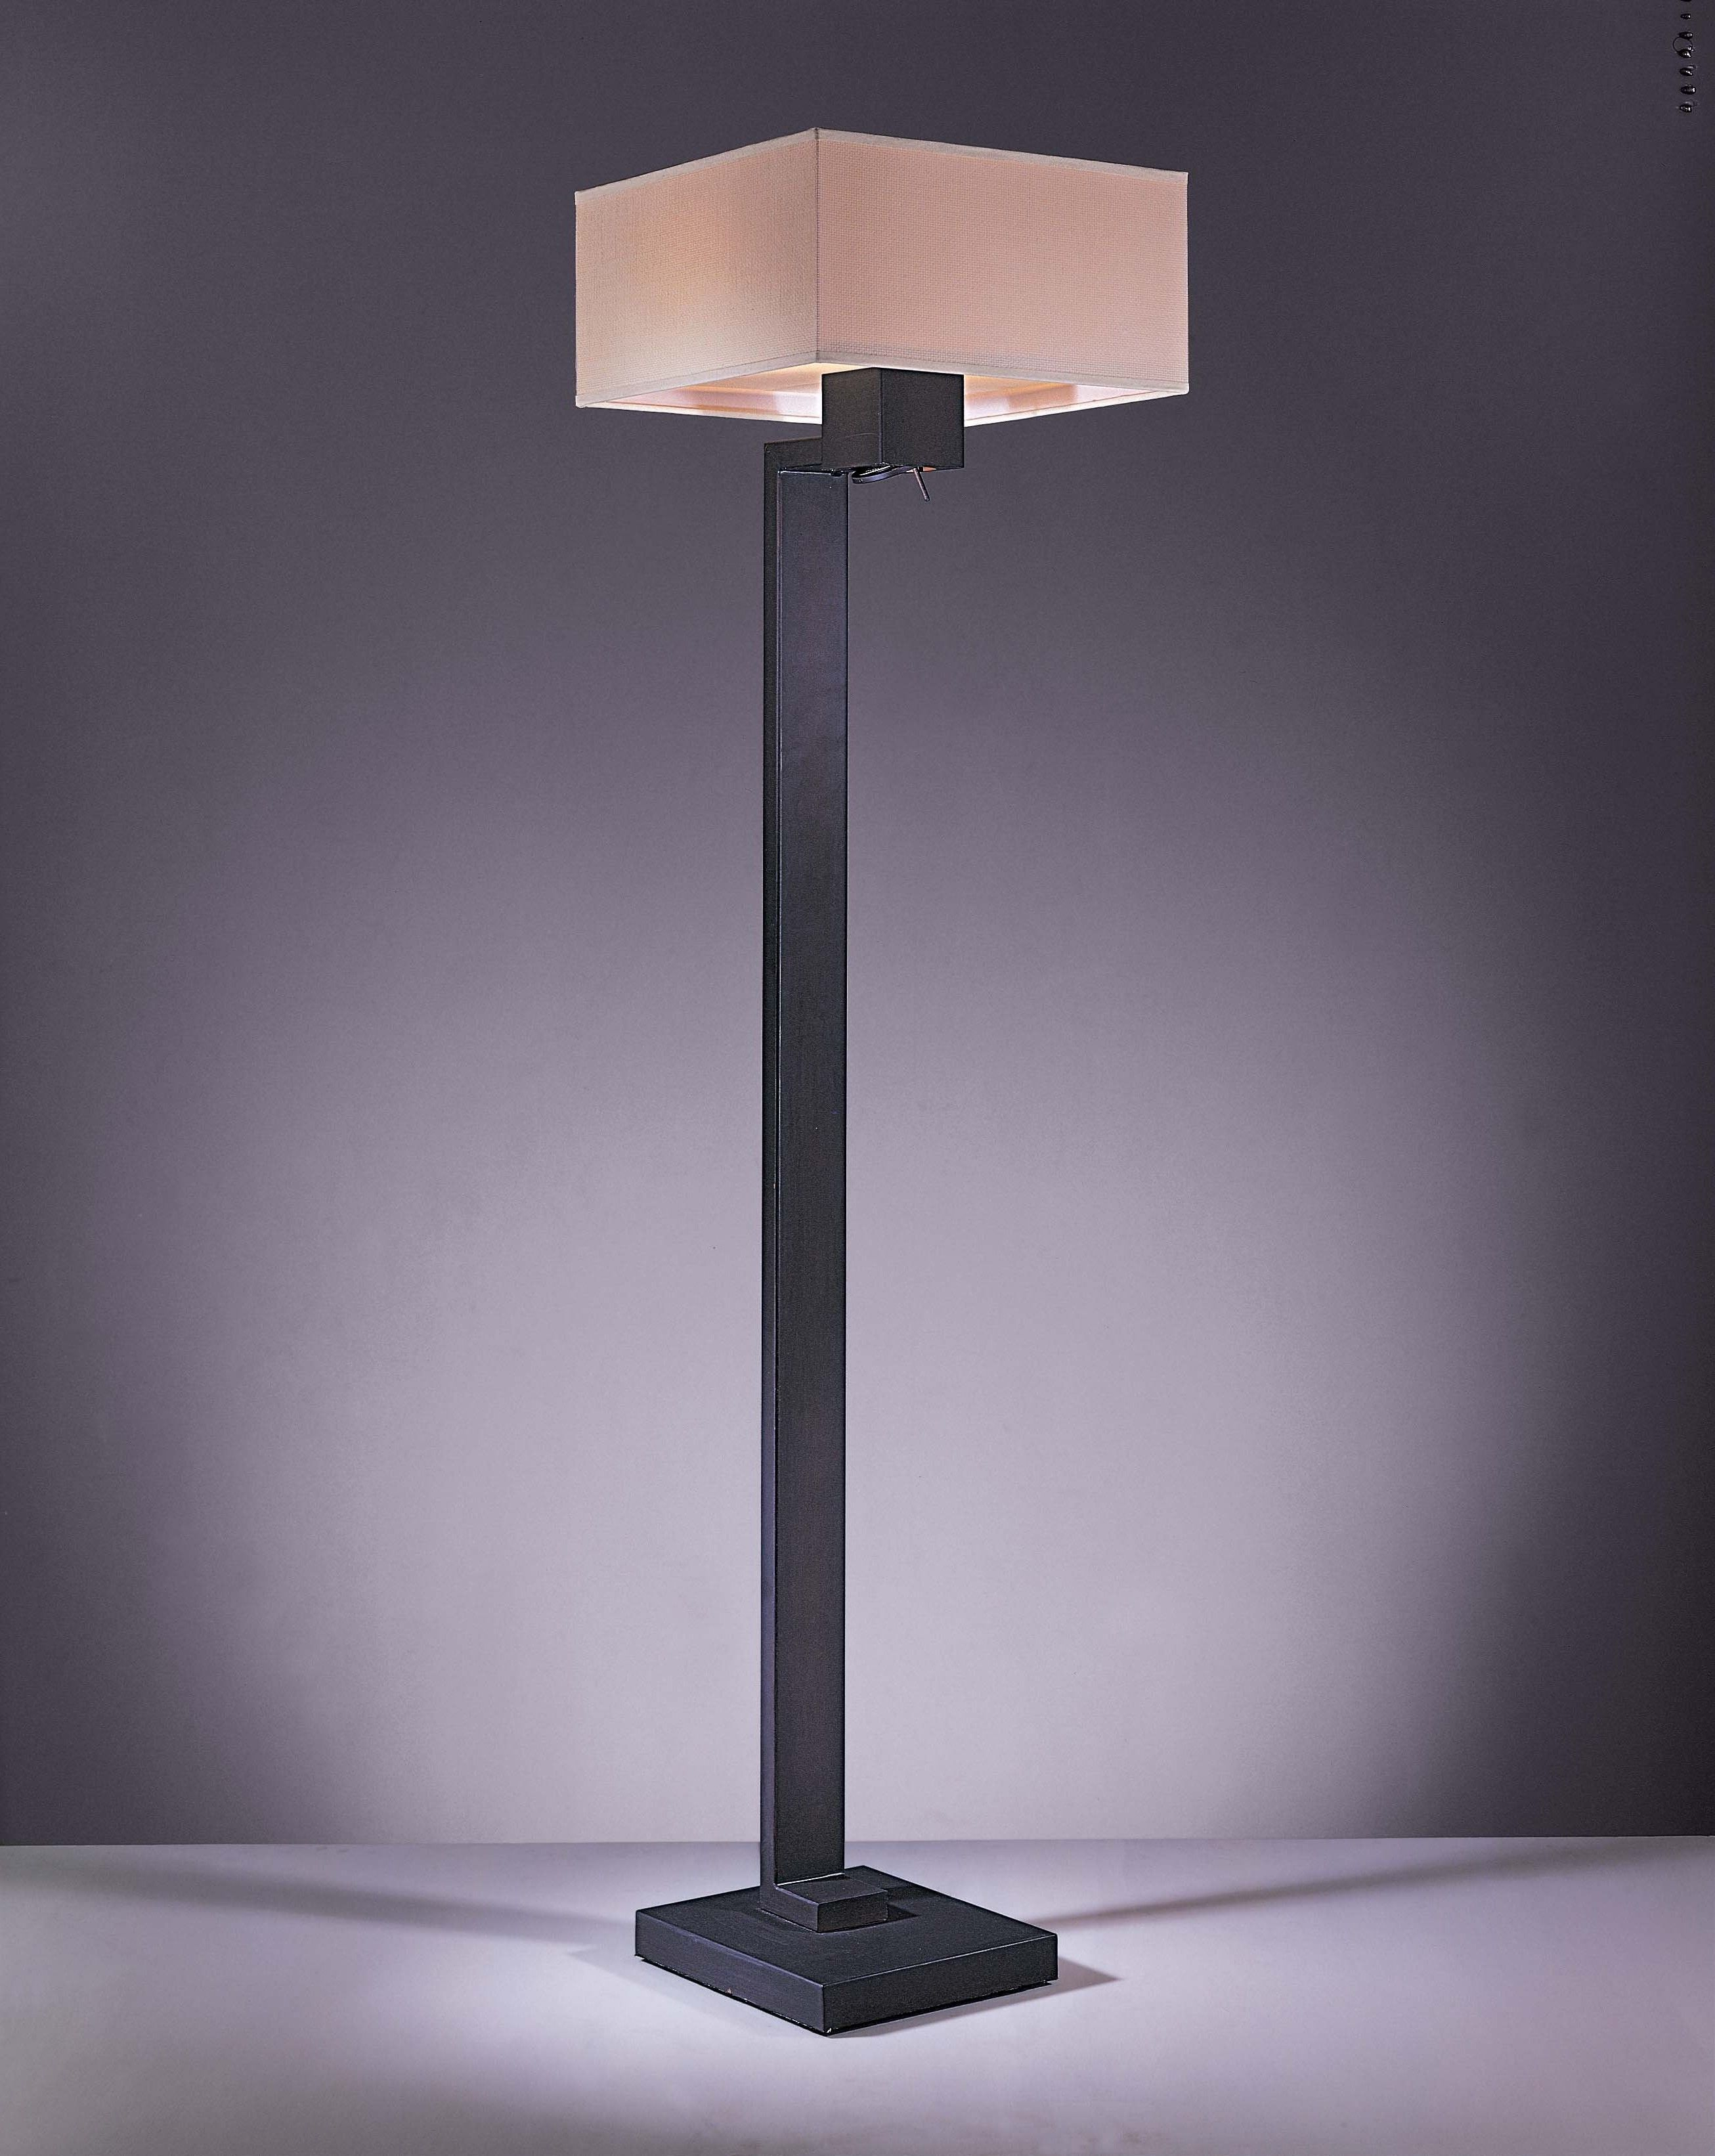 Torchiere Floor Lamps With Dimmer Contemporary Floor Lamps pertaining to sizing 2612 X 3283